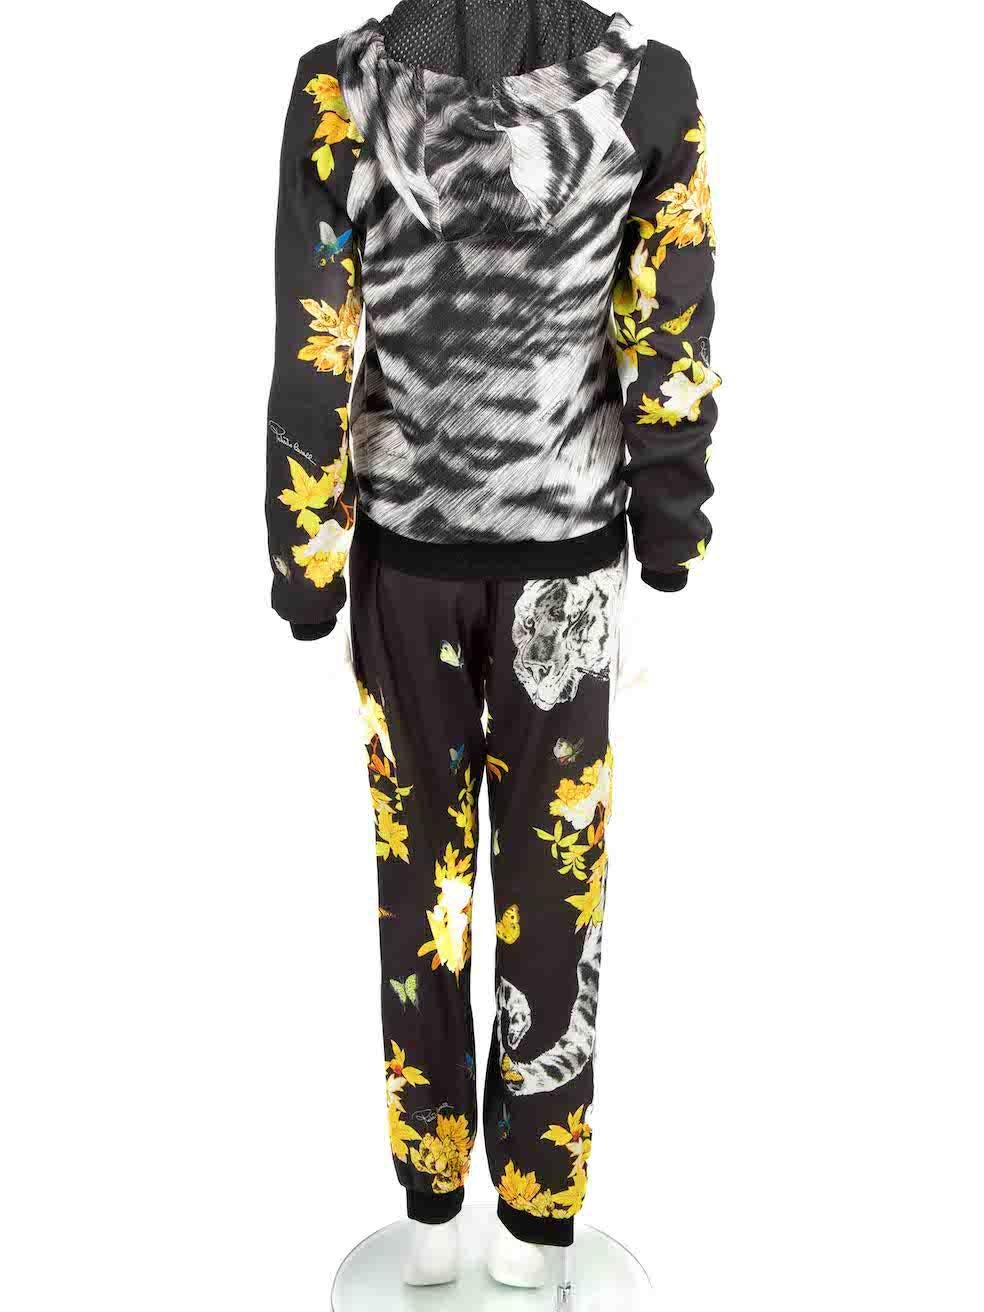 Roberto Cavalli Floral Print Jacket & Trousers Set Size M In Good Condition For Sale In London, GB